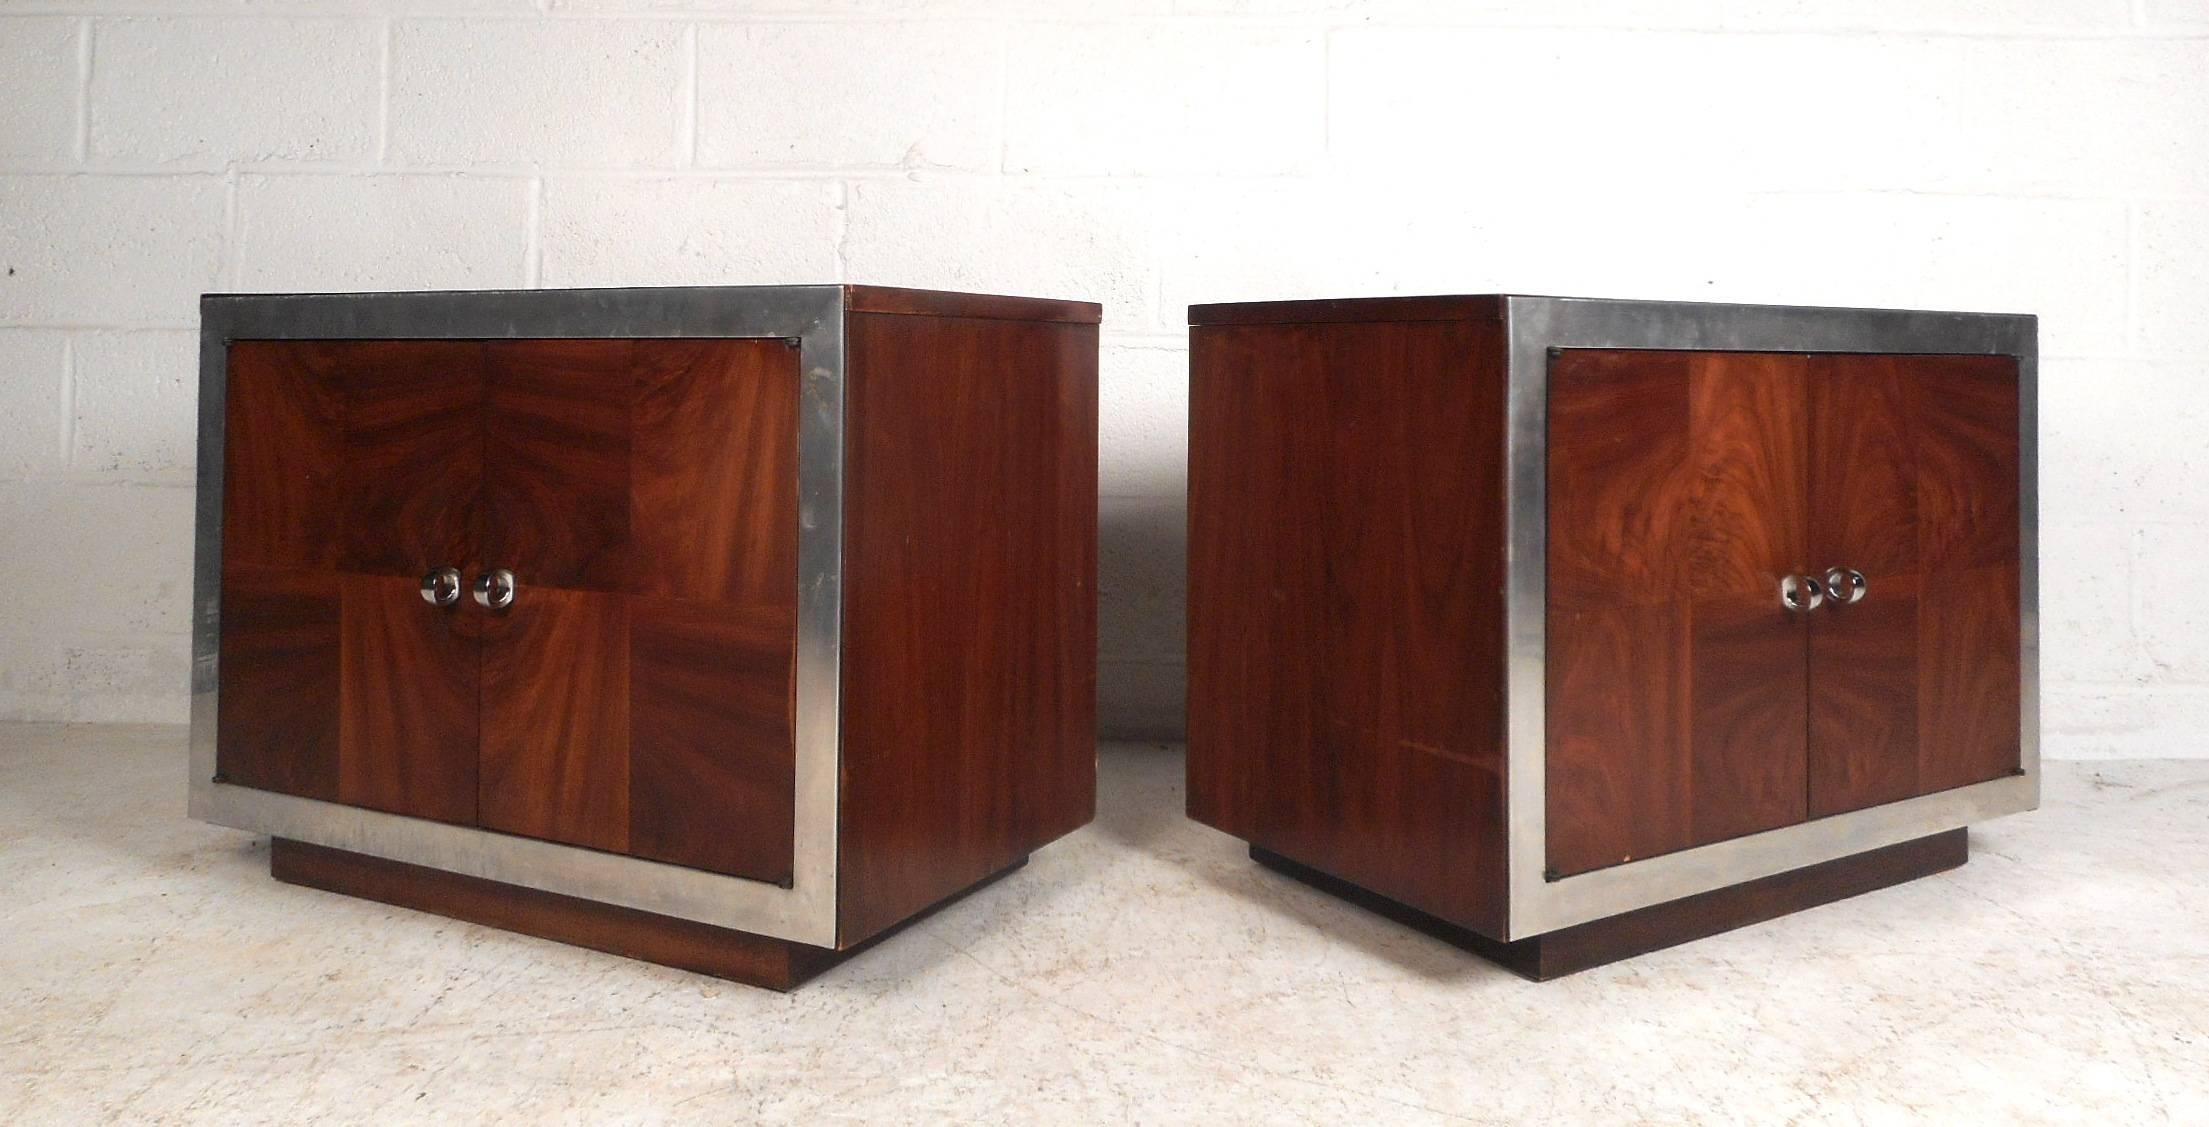 This amazing pair of vintage modern end tables feature unique circular chrome pulls on each cabinet door front. Unusual case pieces with chrome trim wrapped around the front and elegant dark walnut wood grain running in different directions